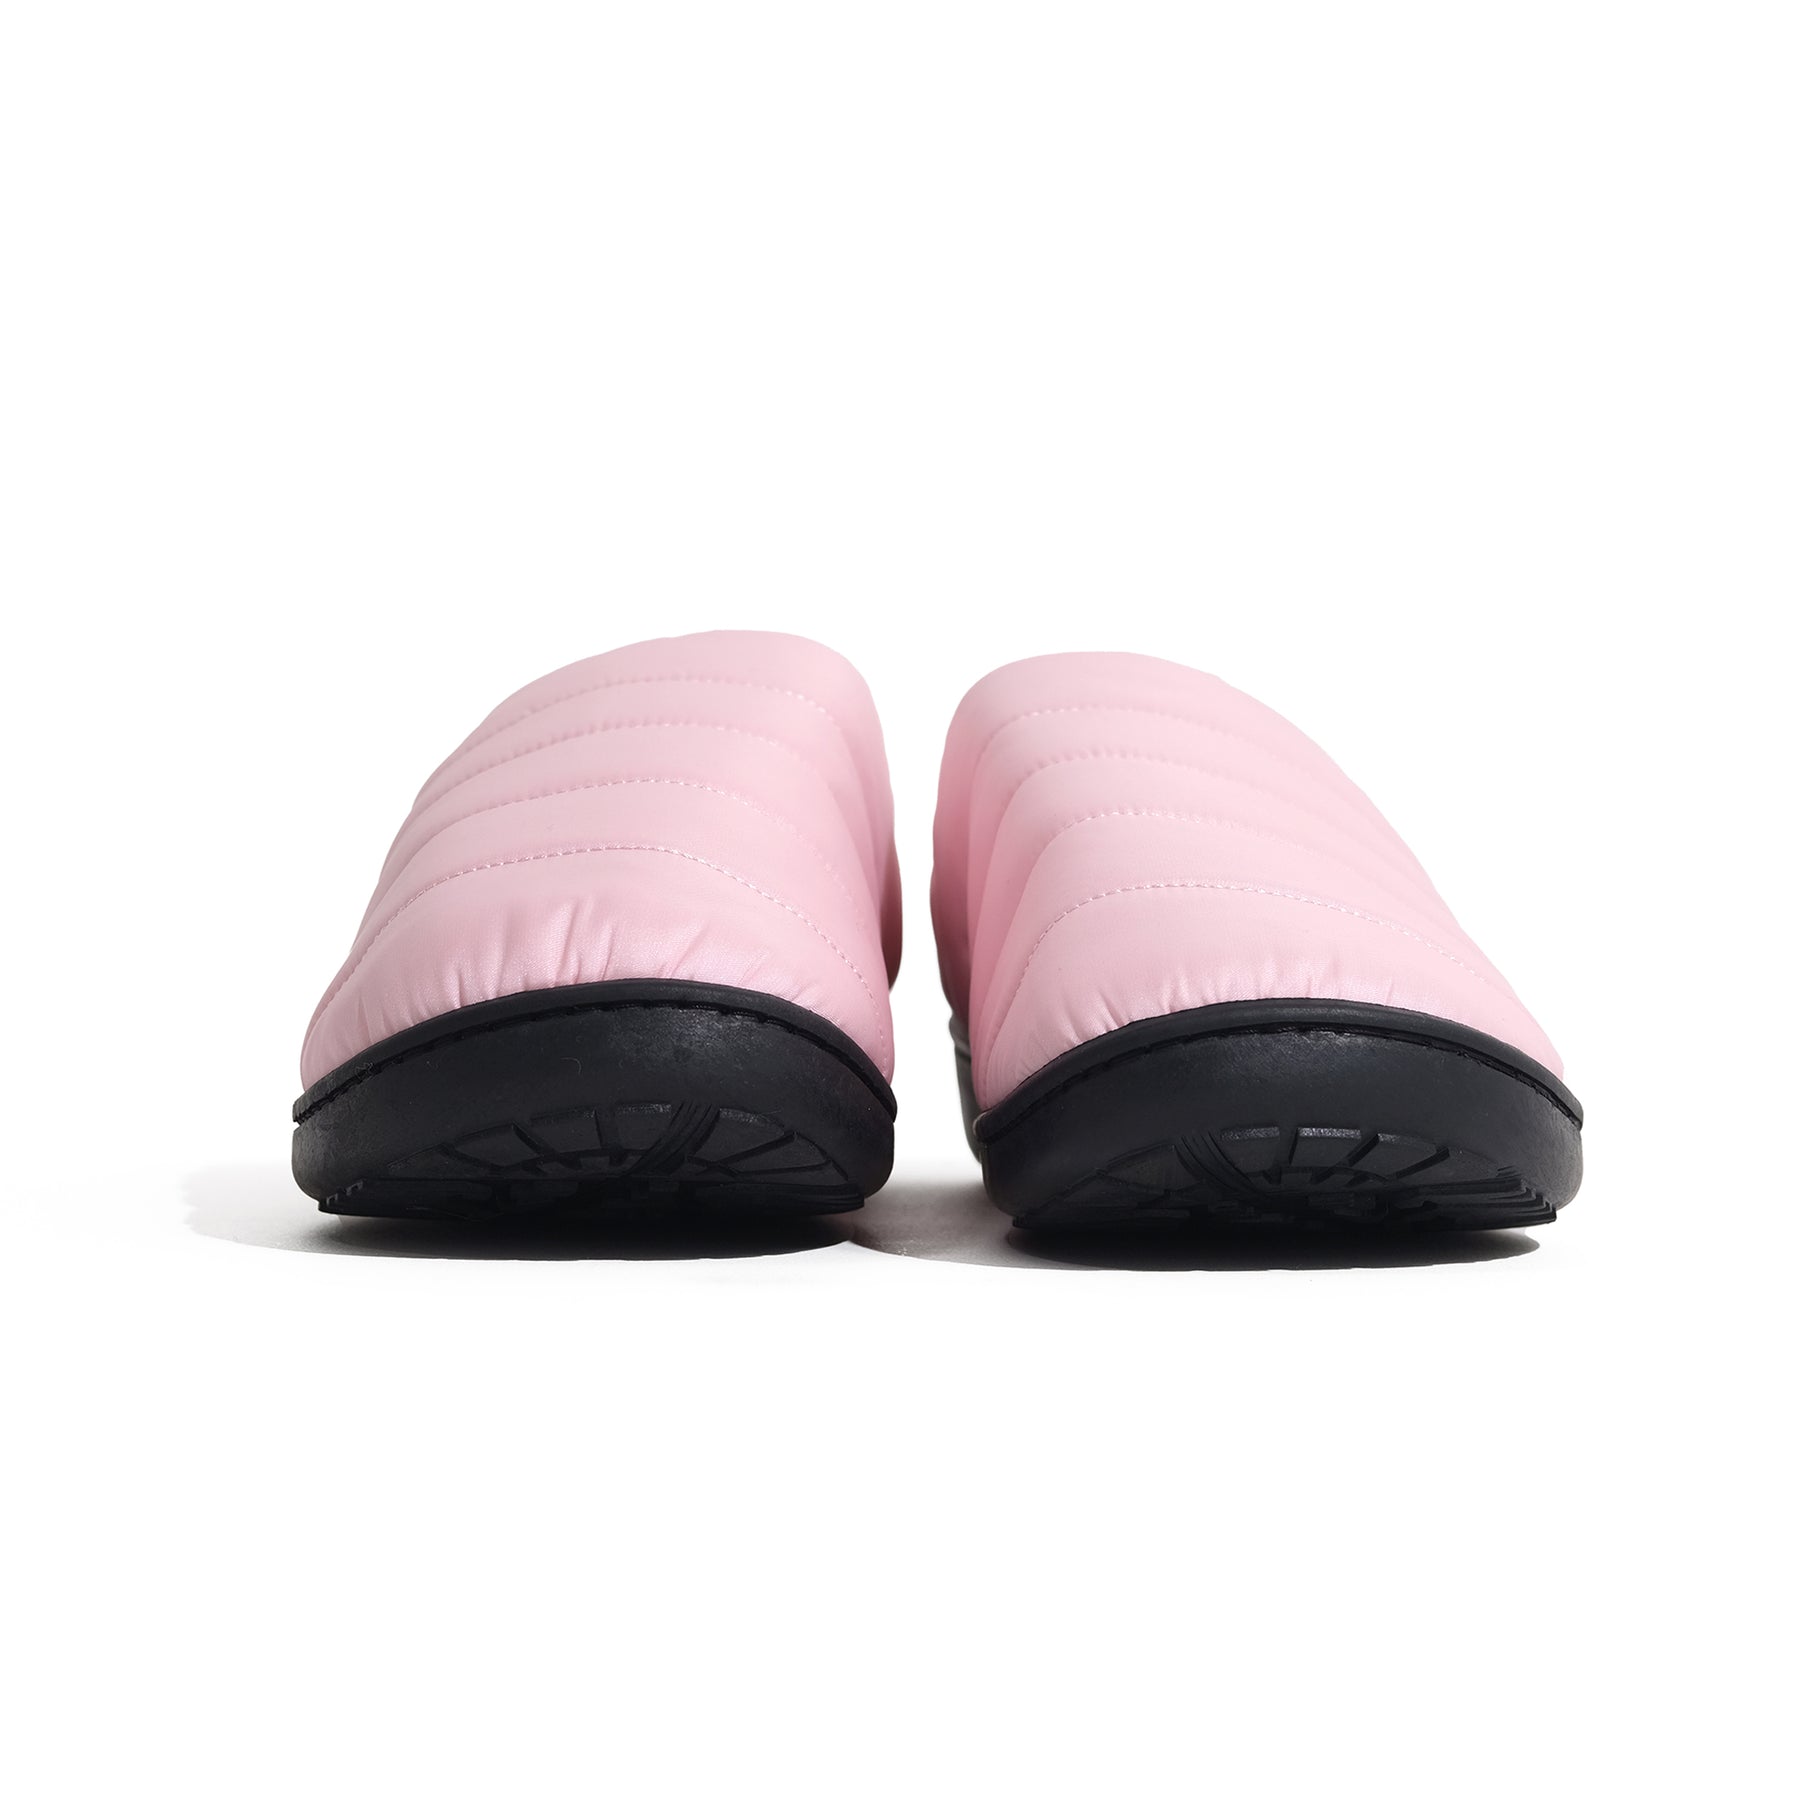 SUBU, Fall & Winter Slippers Pink, Size, 4, Slippers,